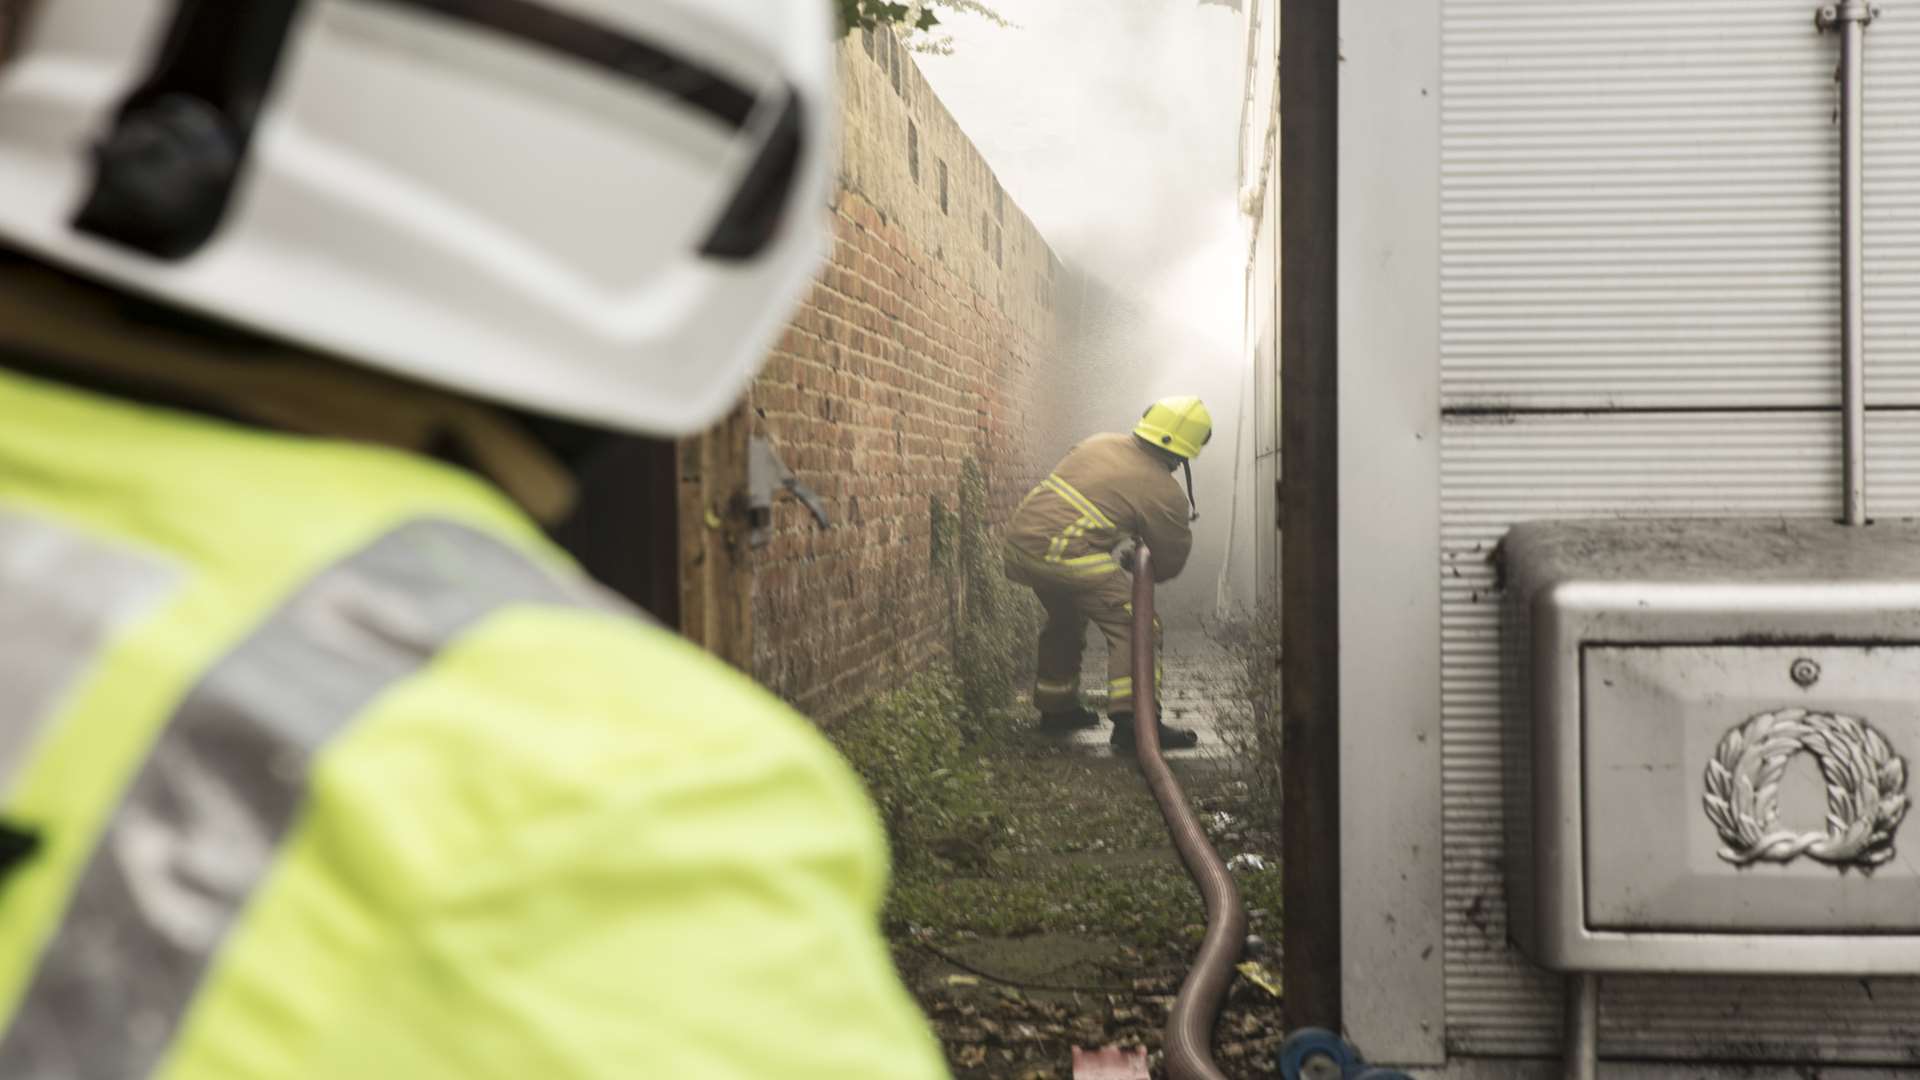 Crews discovered a pile of burning rubbish behind Tesco express. Picture: Kent Fire and Rescue Service